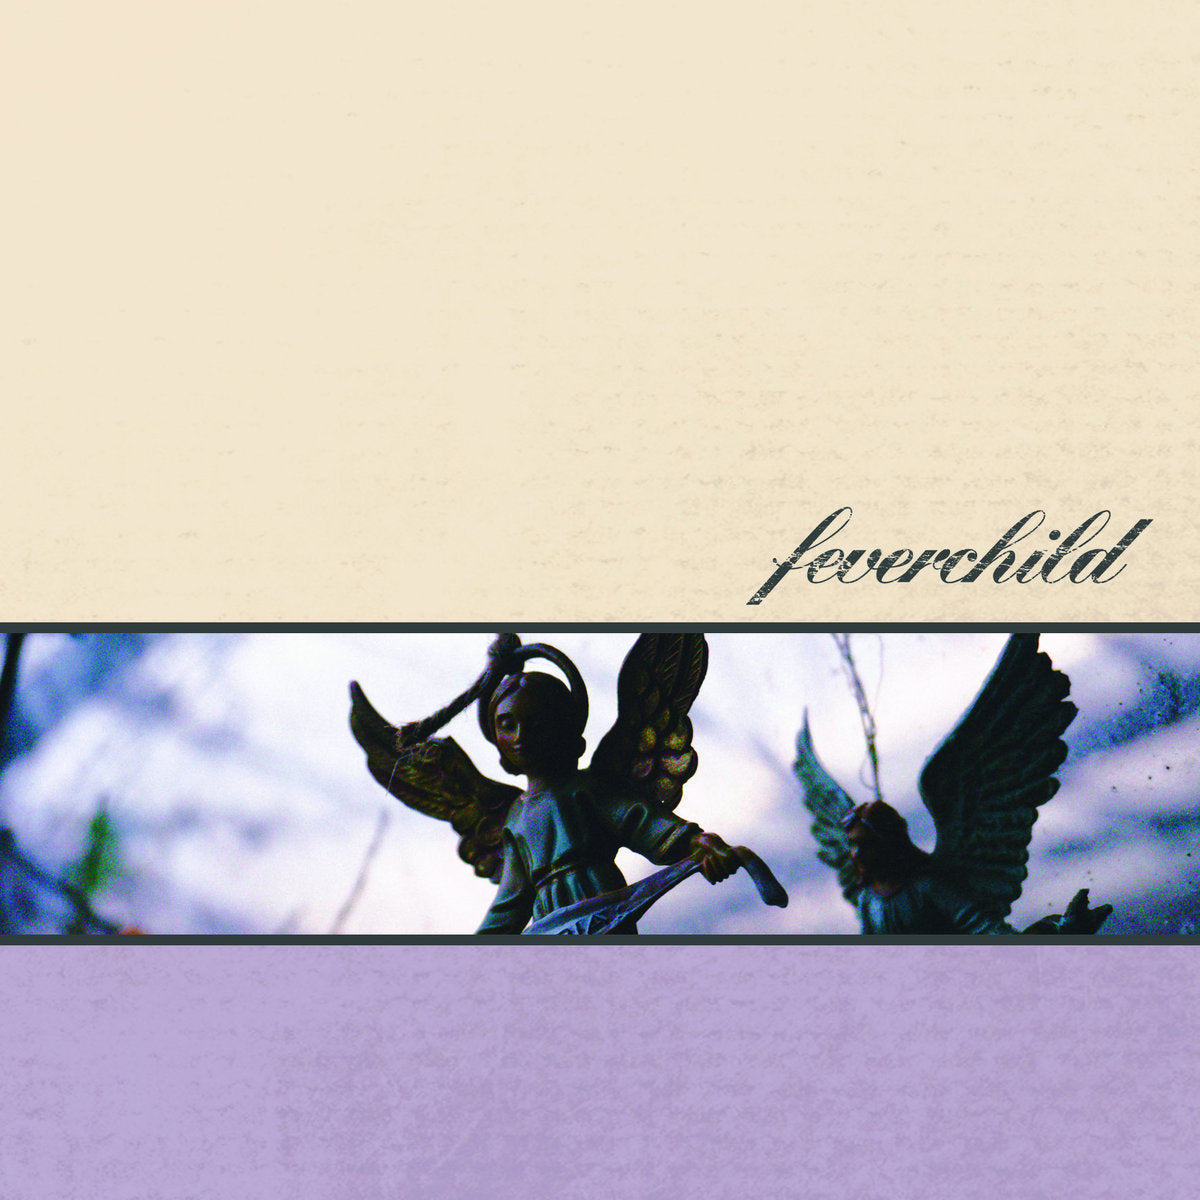 Feverchild "Witching Hour / You Know I Can't" EP